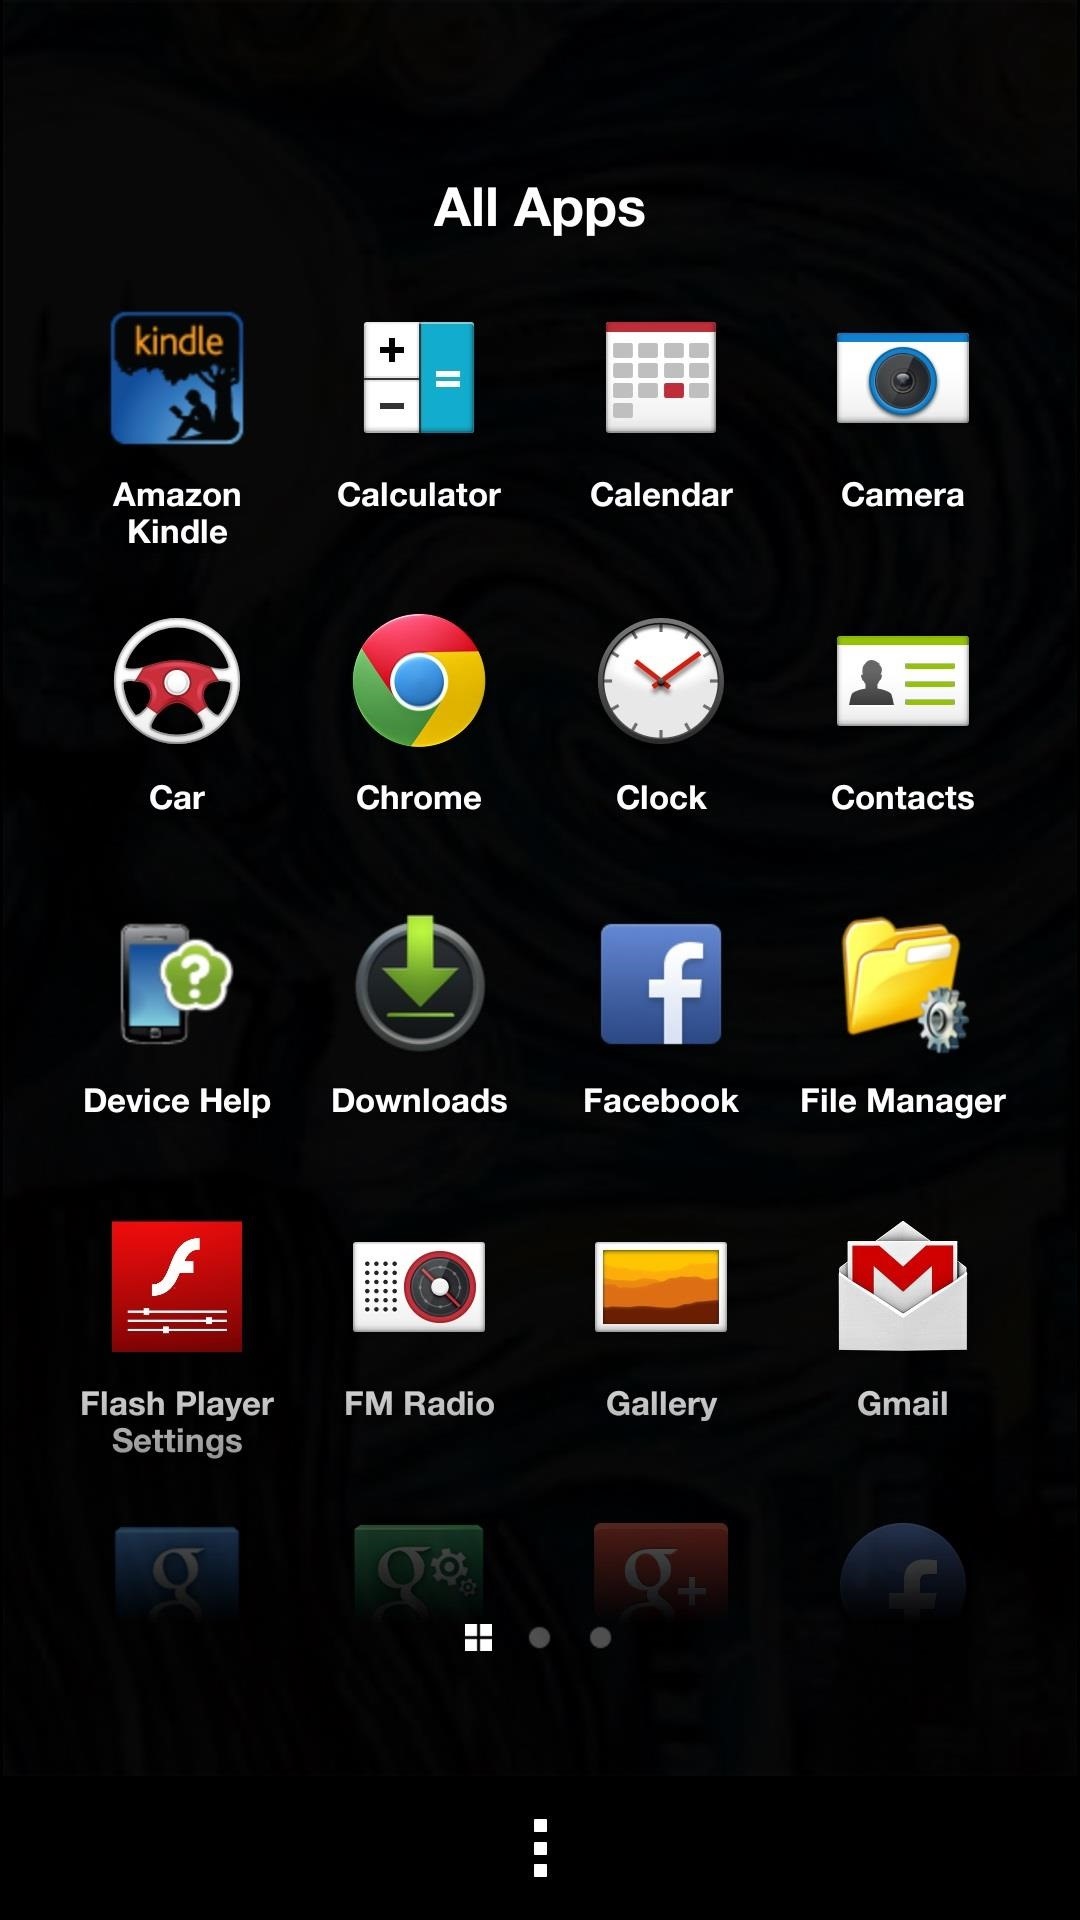 How to Install Facebook Home on Your HTC One or Other Android Device